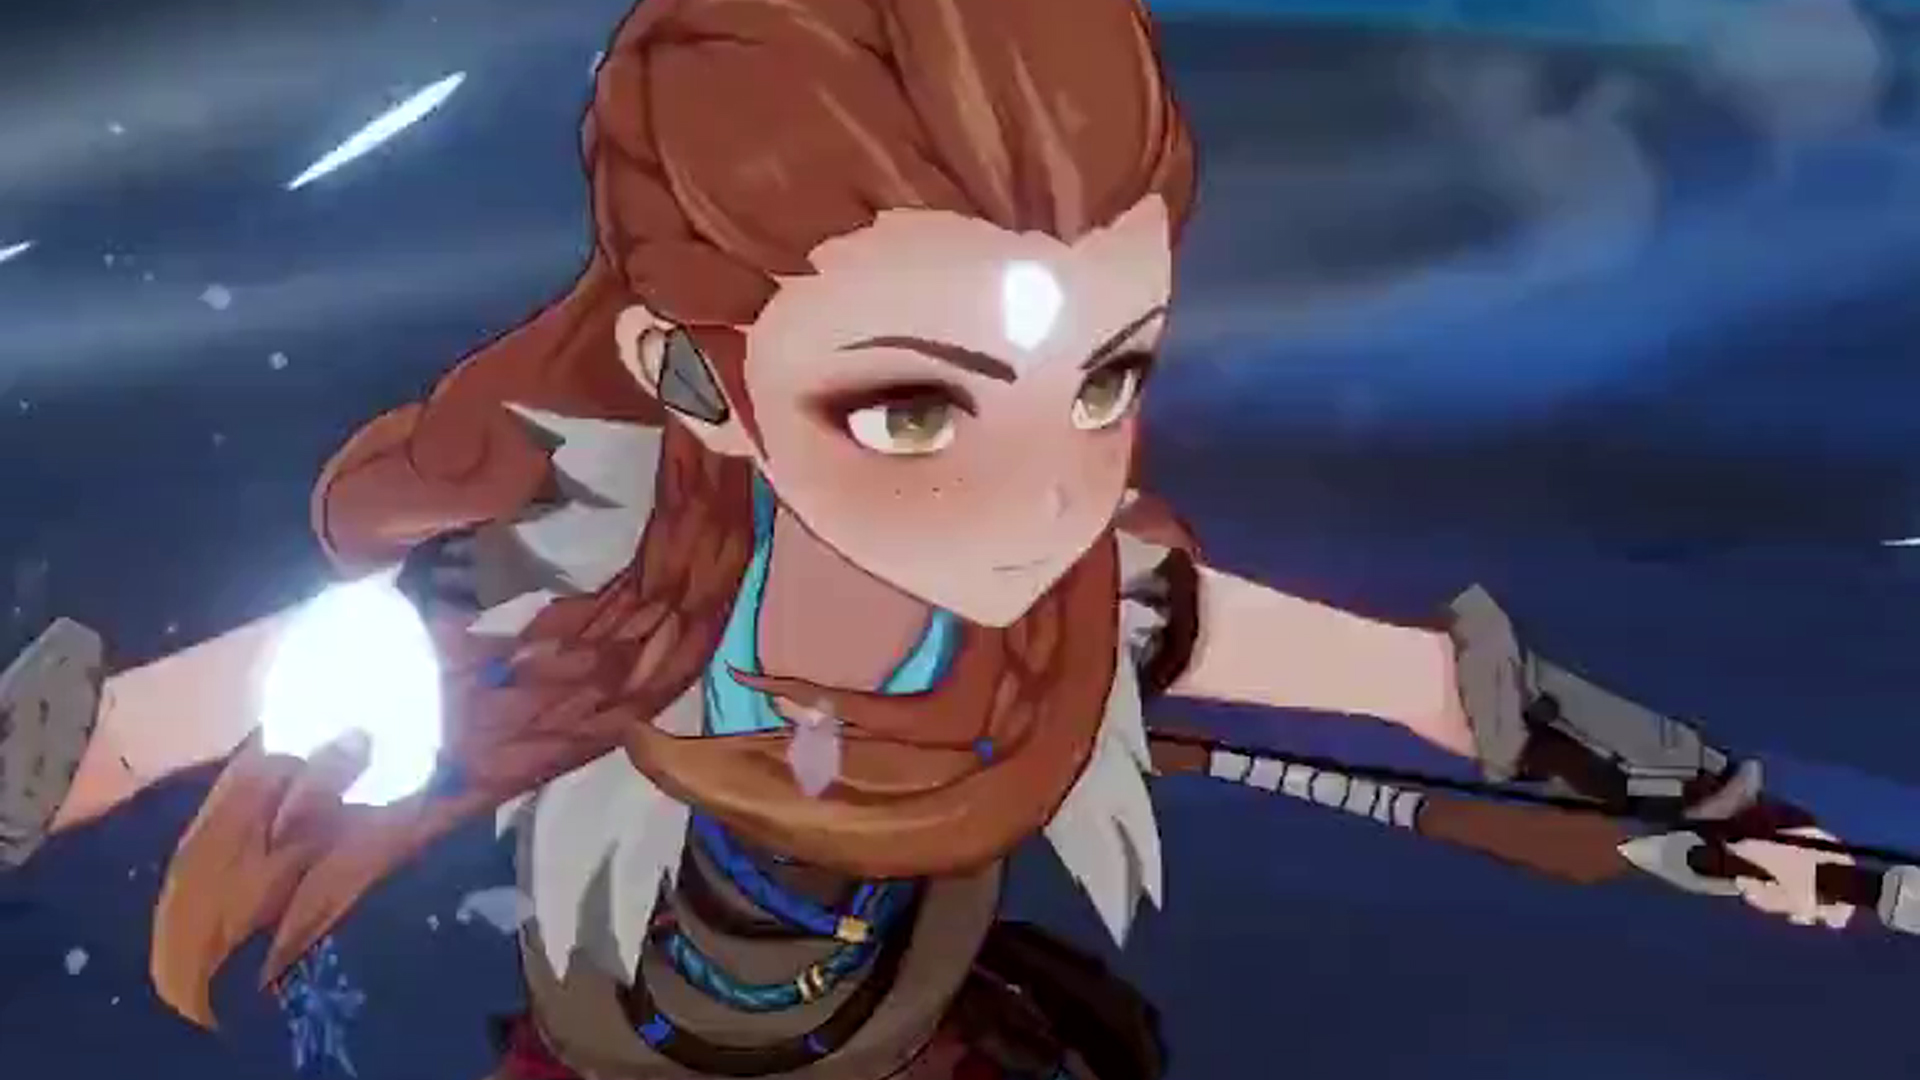 Here’s the first gameplay of Horizon’s Aloy in Genshin Impact